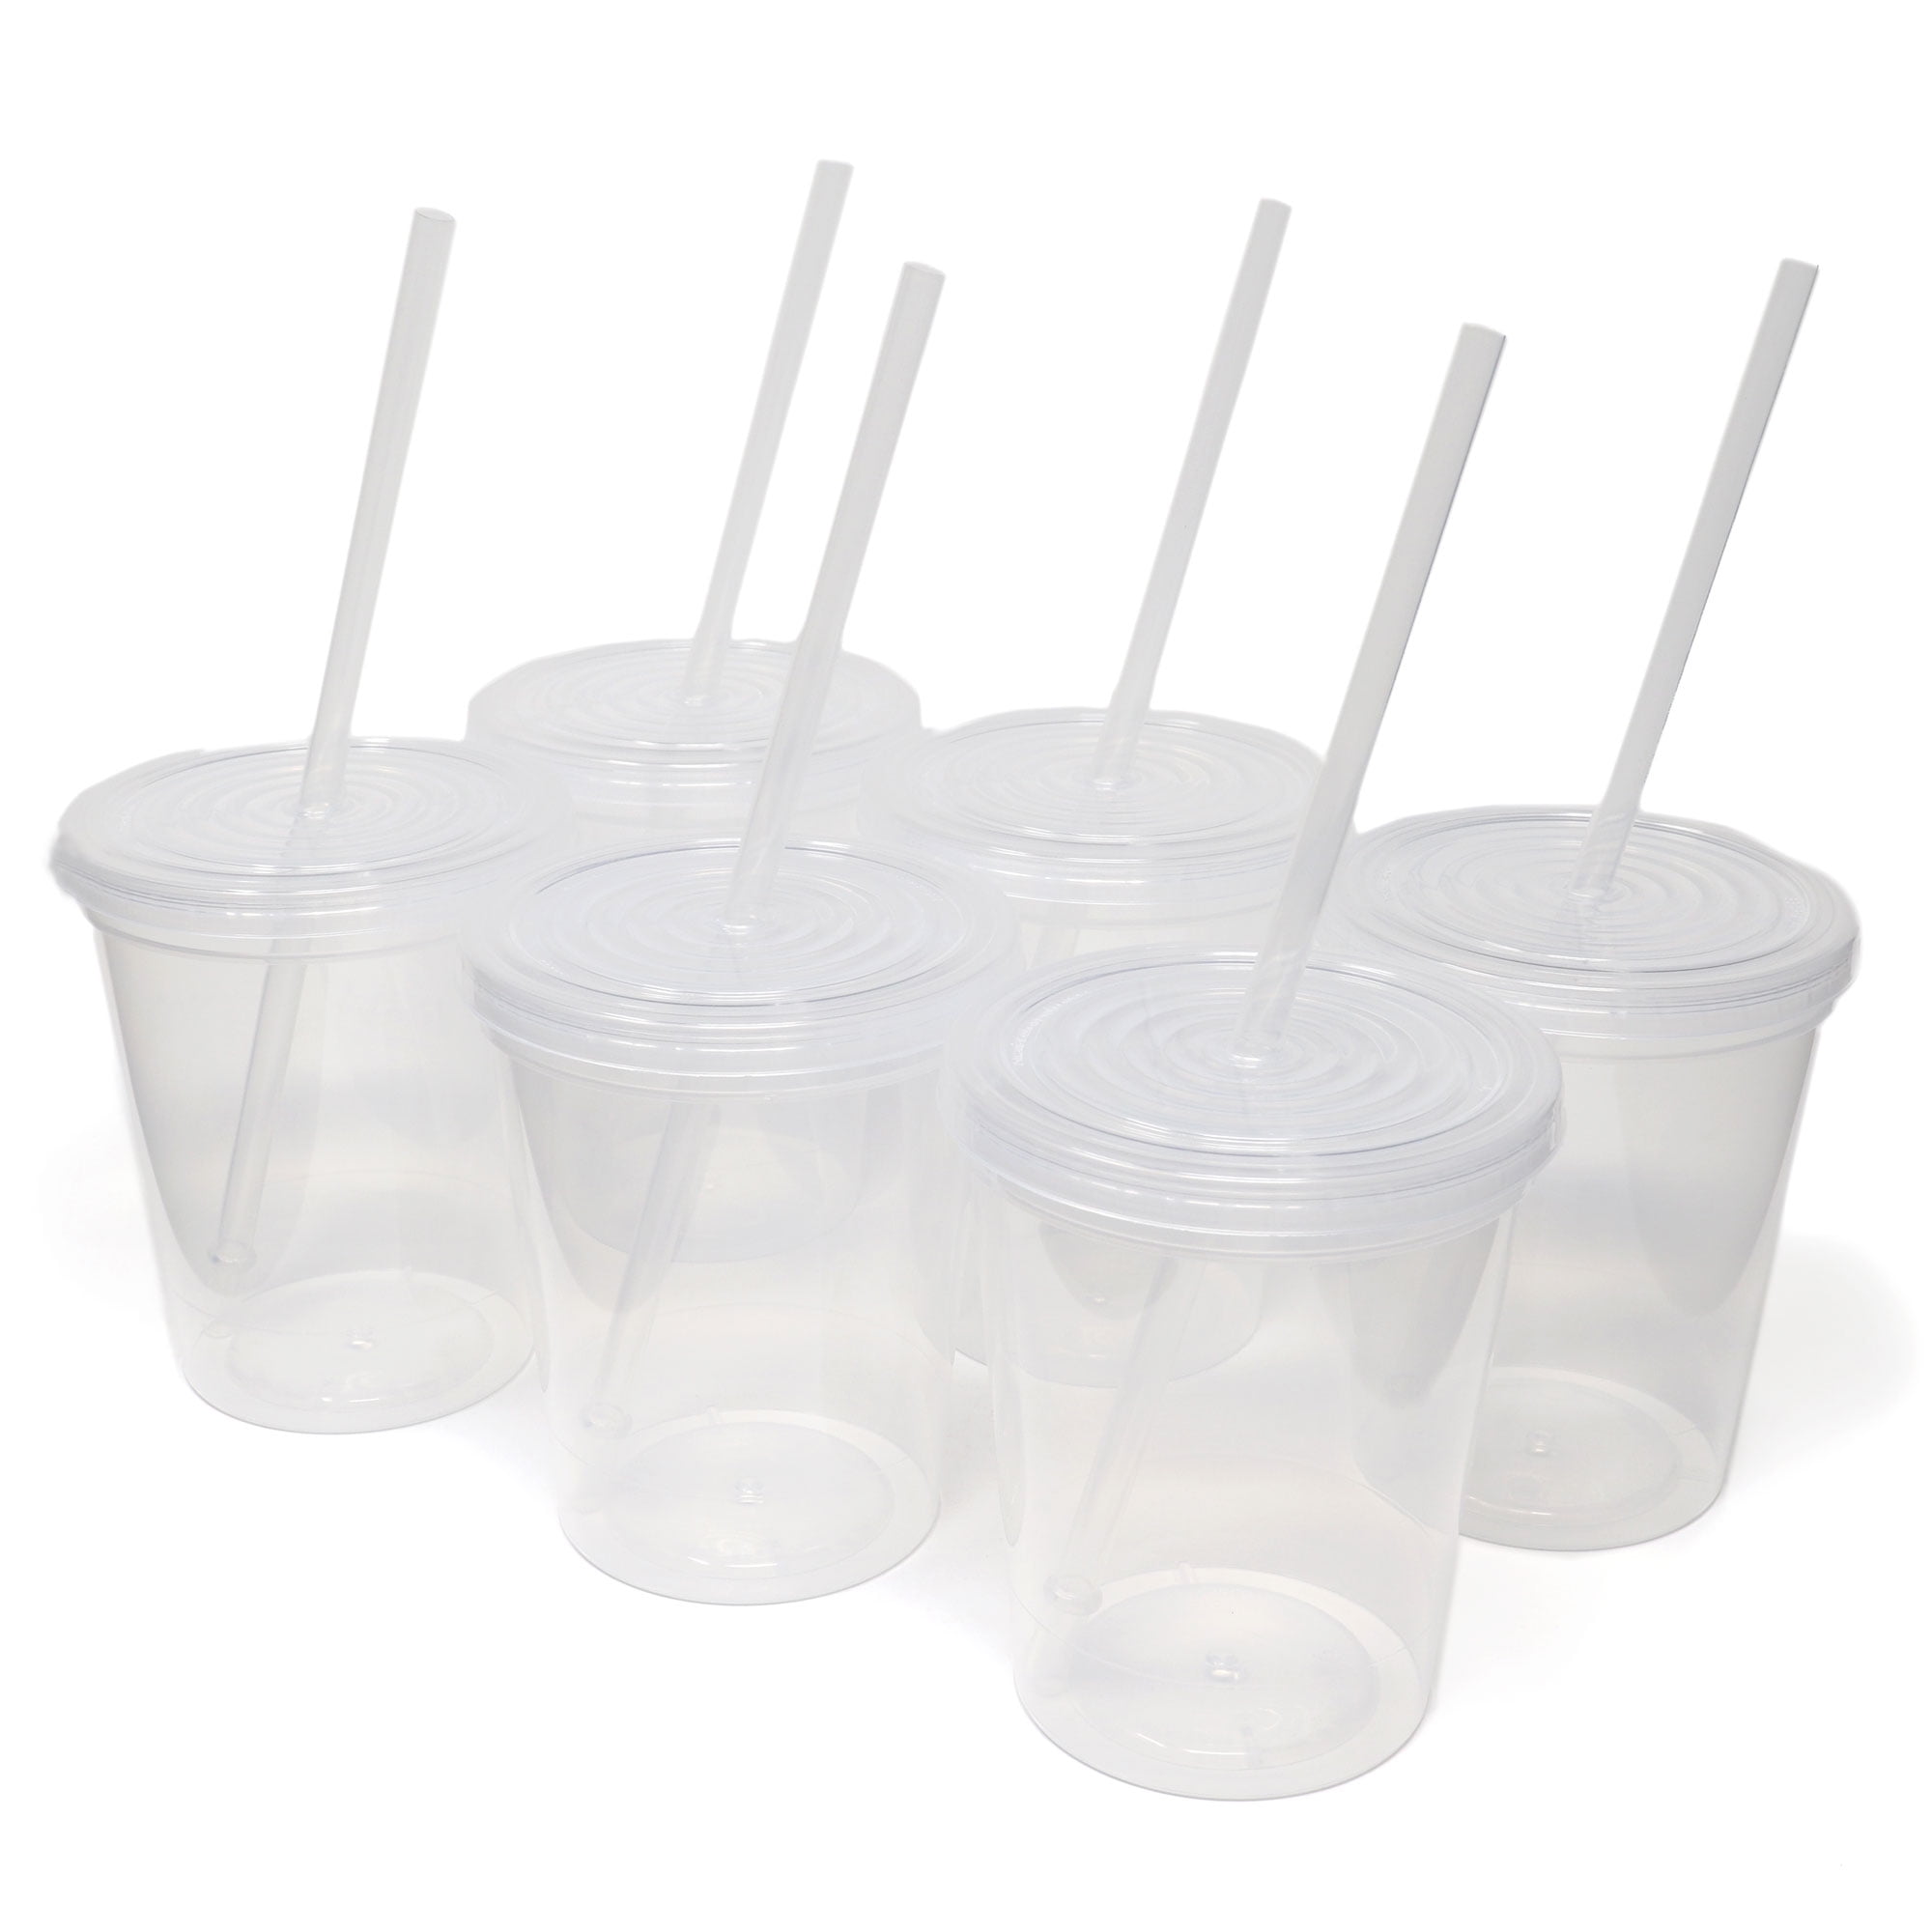 US Acrylic Classic Clear Plastic Reusable Drinking Glasses (Set of 6) 16oz  Water Cups | BPA-Free Tum…See more US Acrylic Classic Clear Plastic